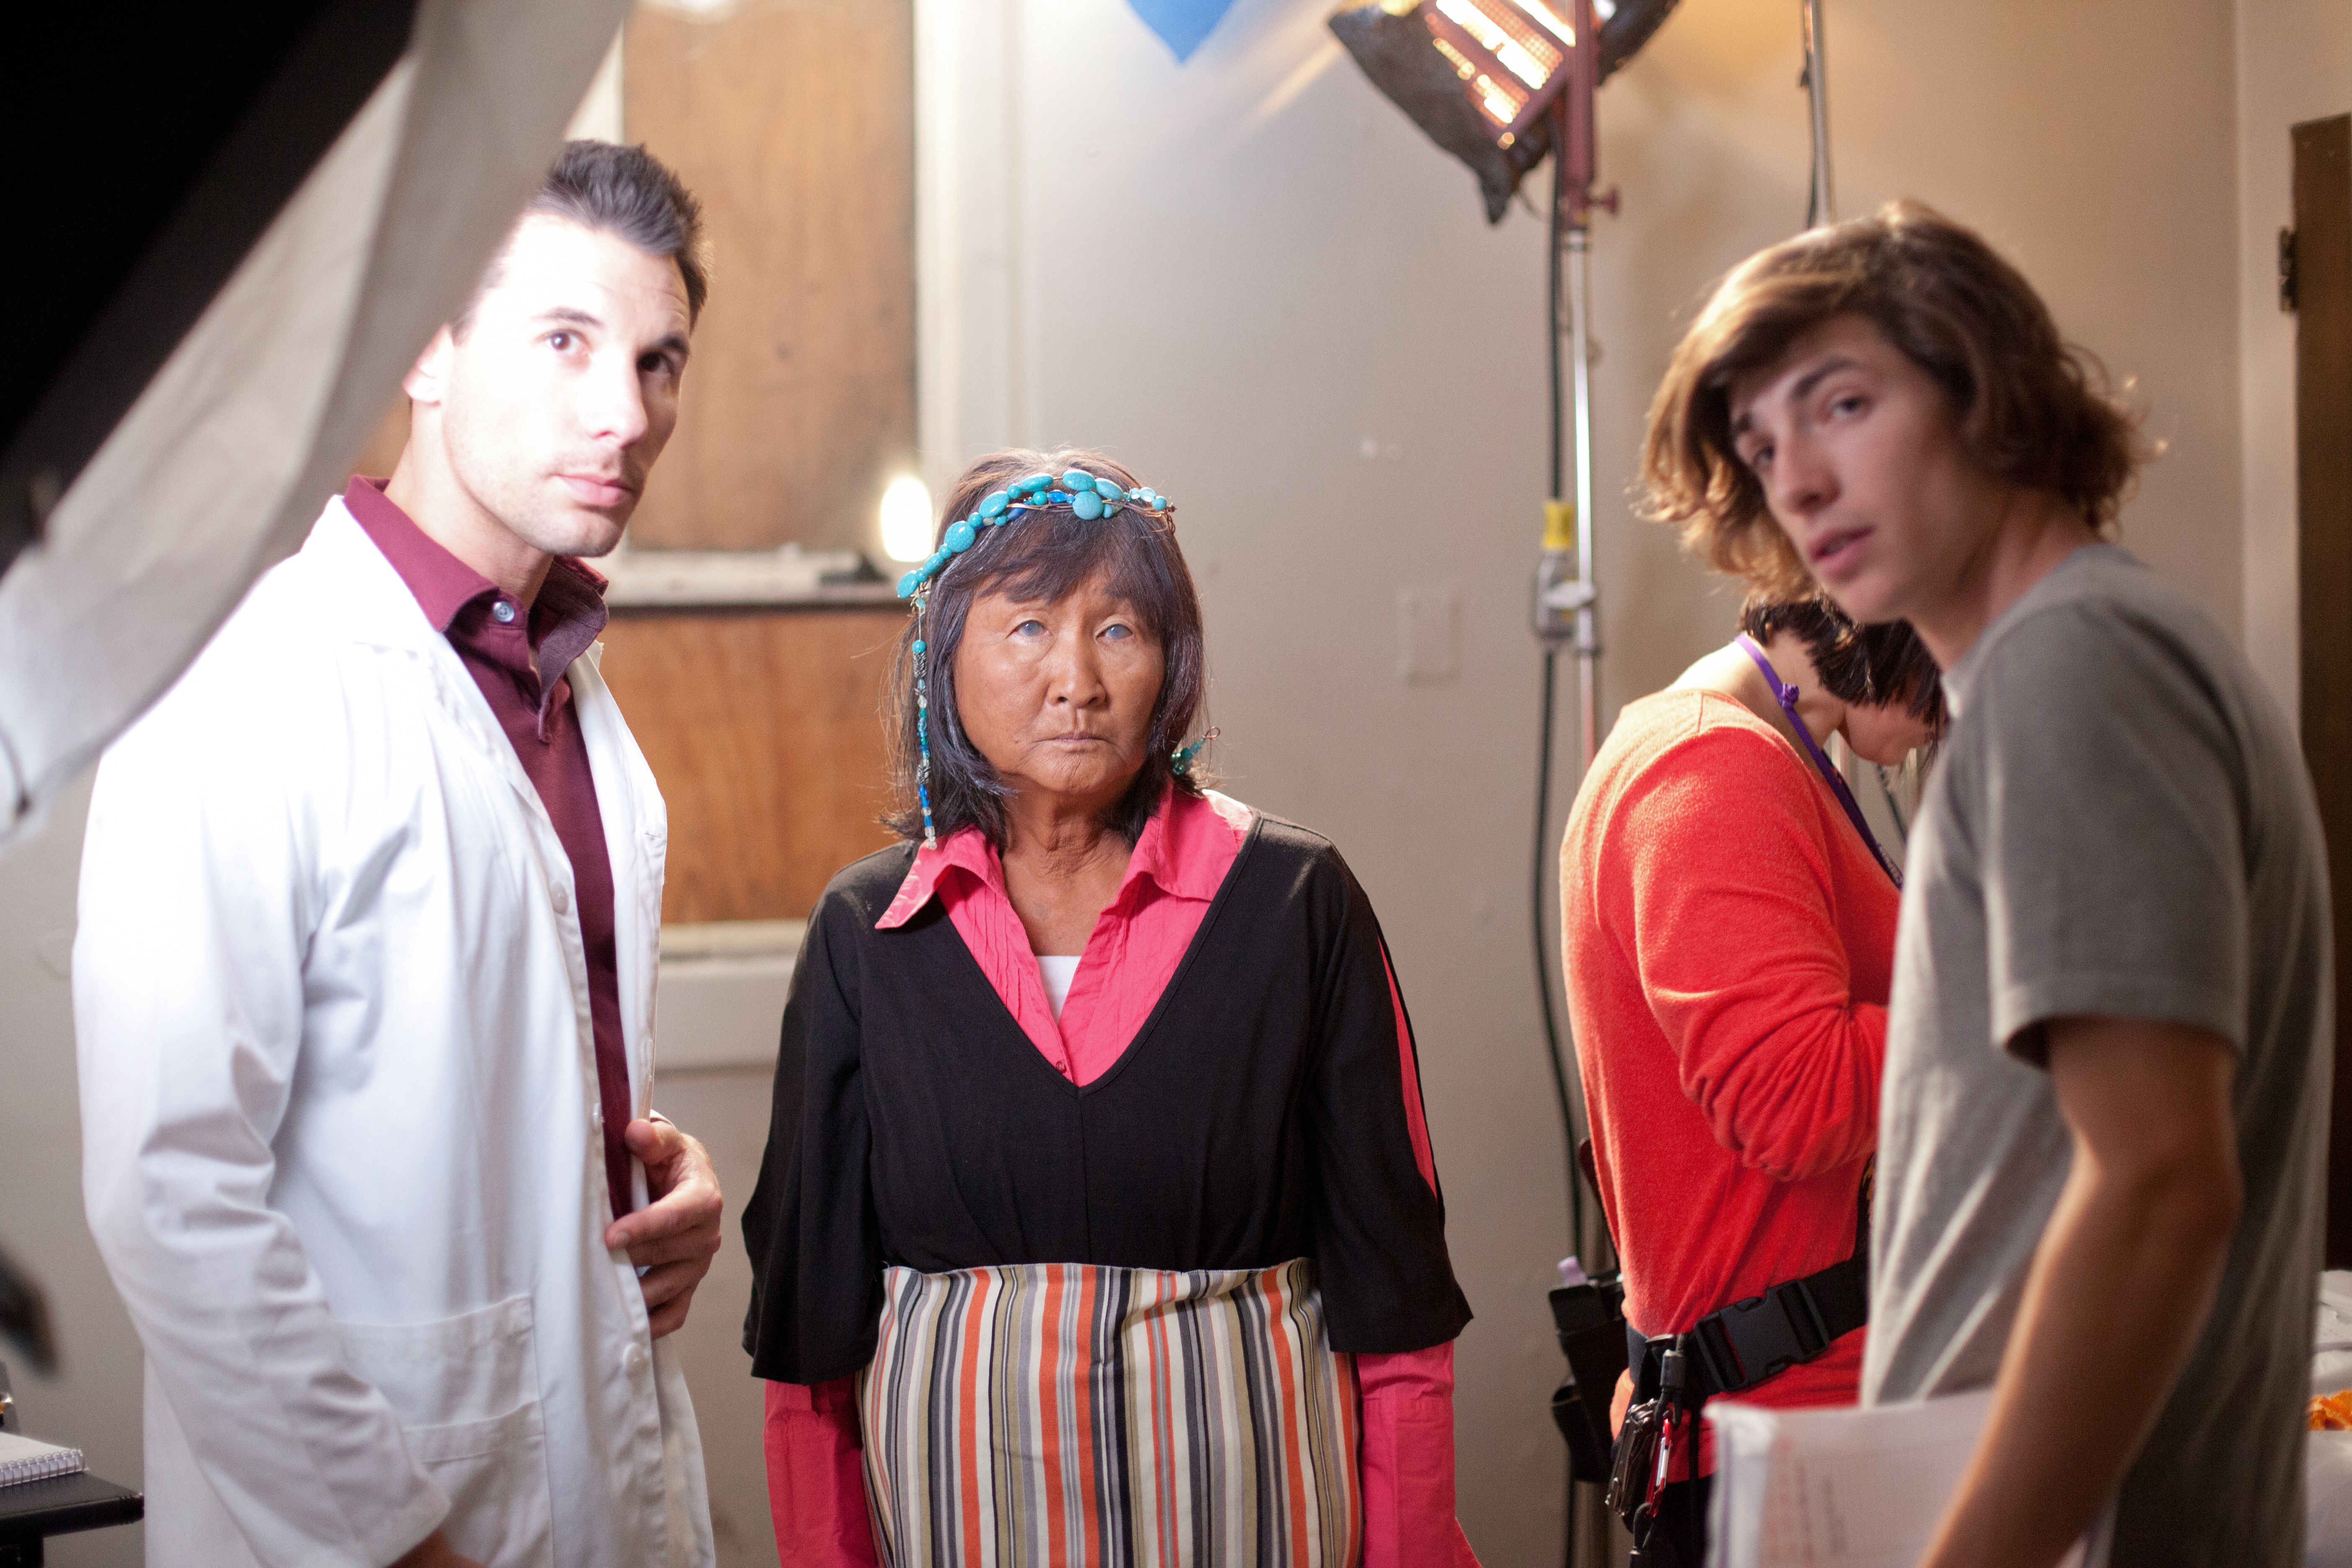 On set with Karen Yum and director Toby Wosskow while shooting 